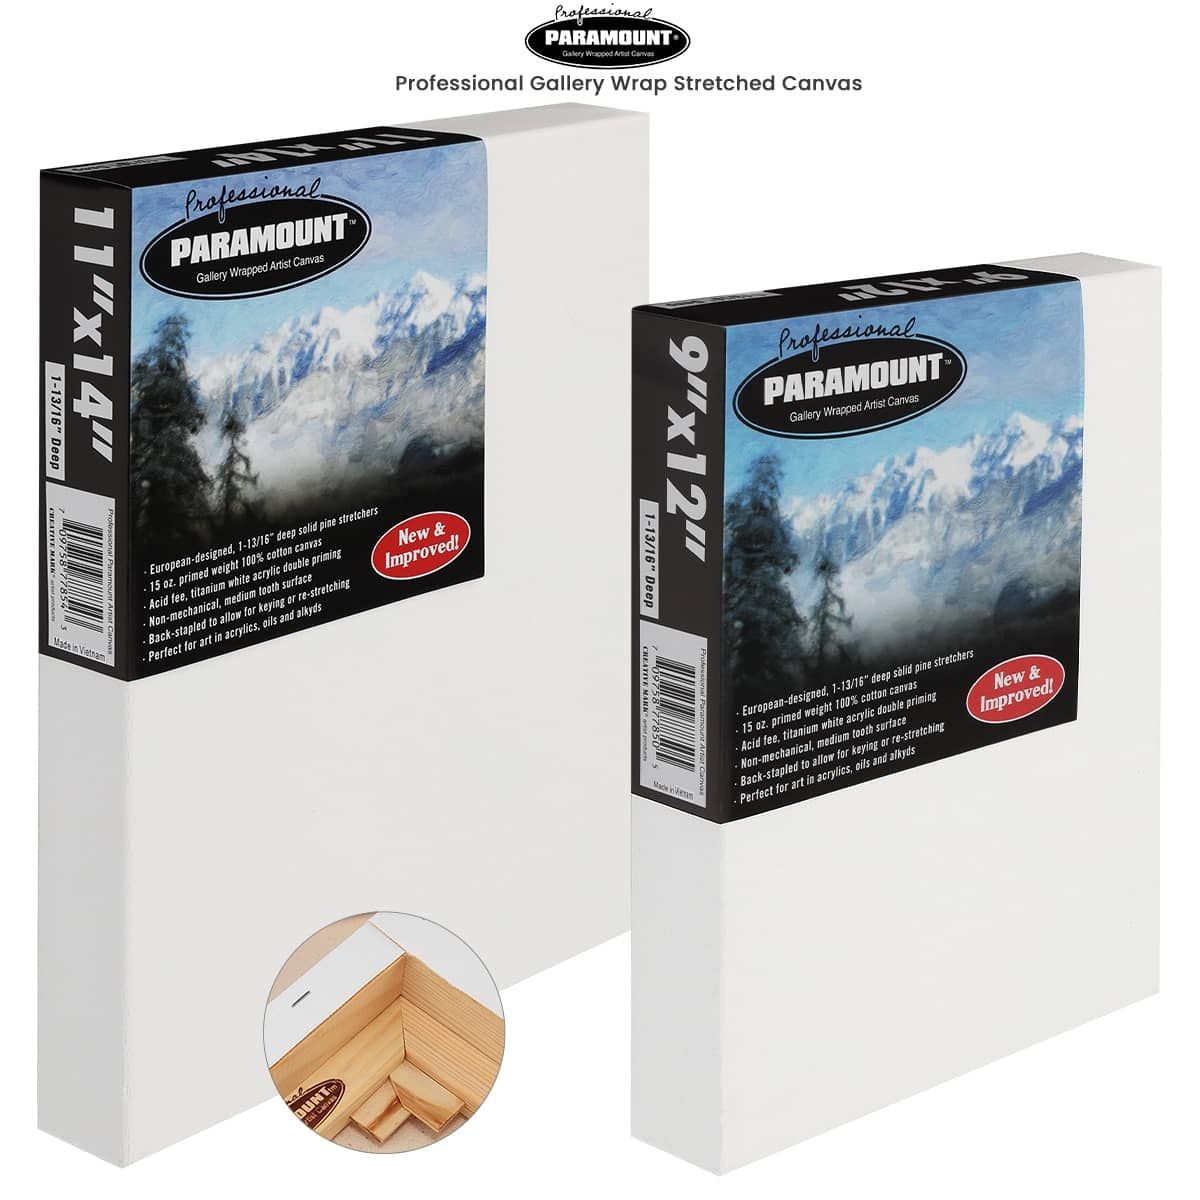 Paramount 1-13/16" Deep,  Professional Gallery Wrap Stretched Canvas